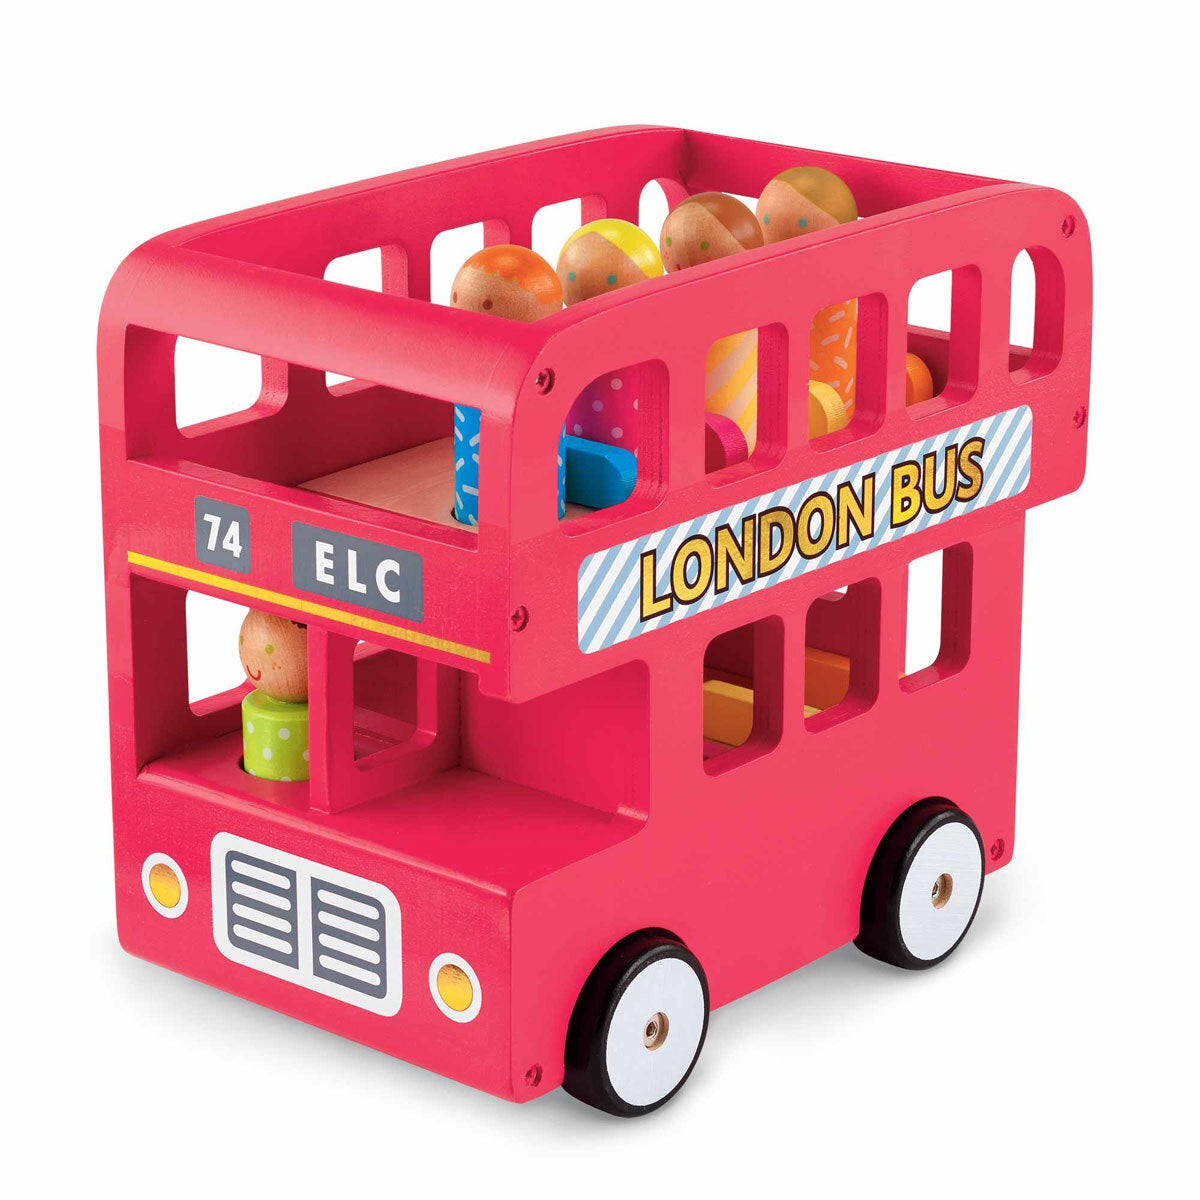 Early Learning Centre Wooden Double Decker Bus